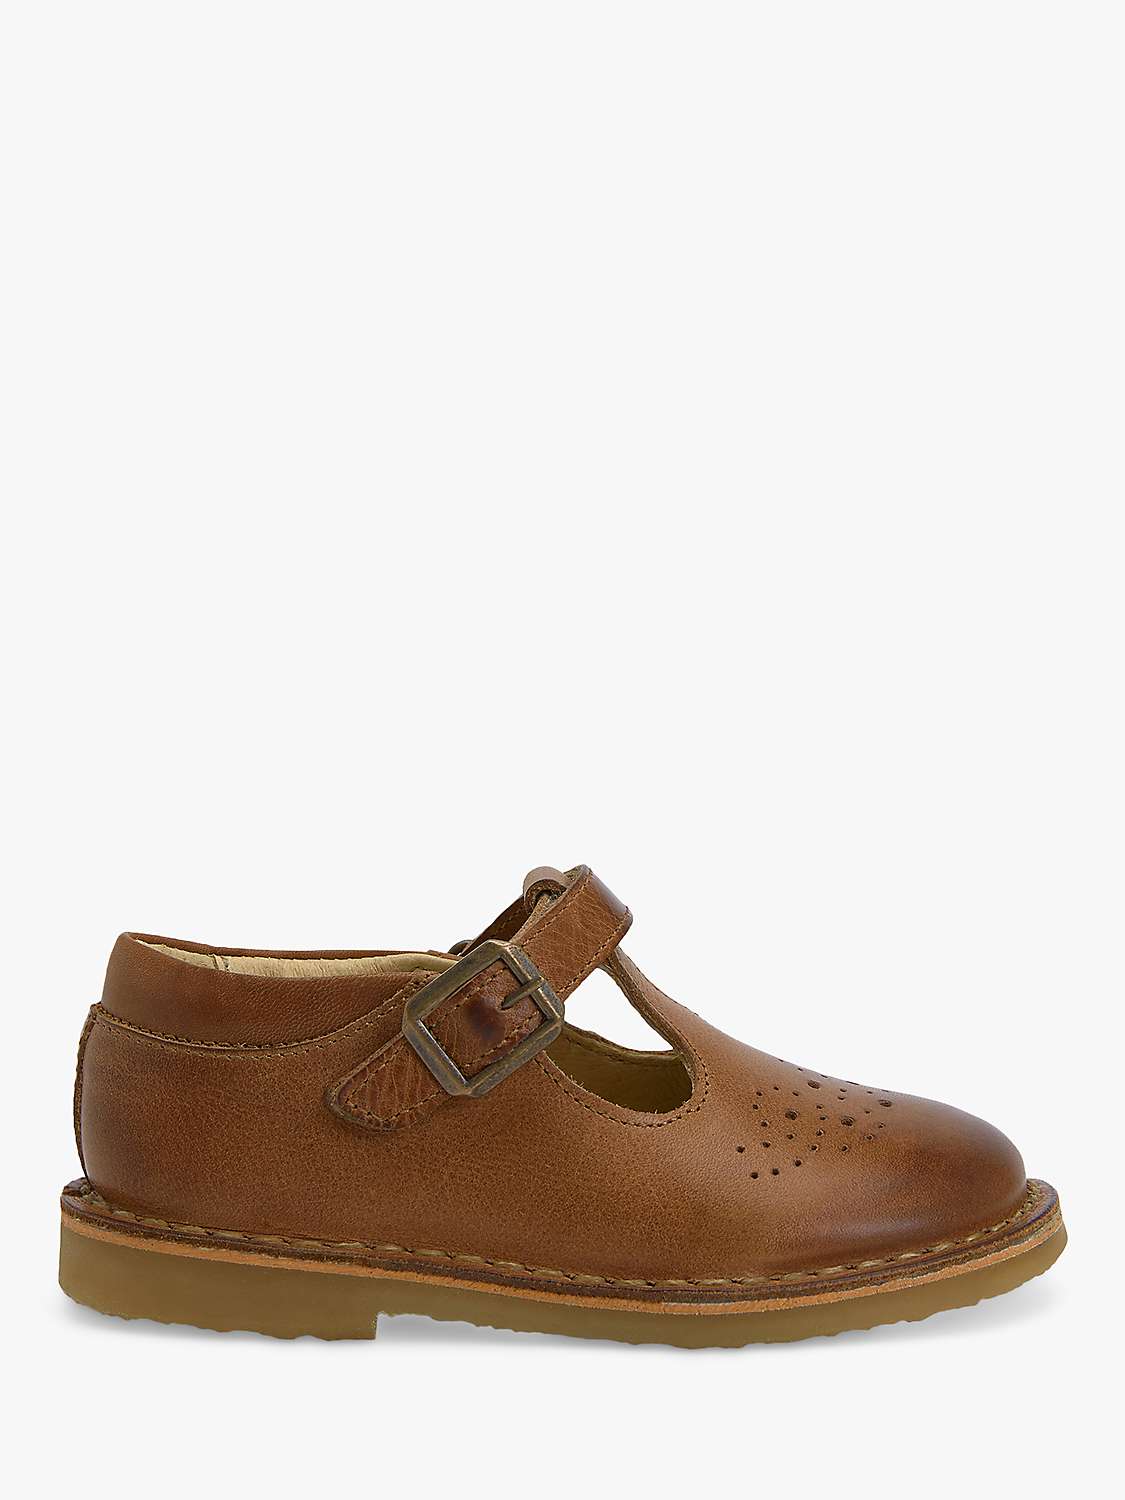 Buy Young Soles Kids' Penny T-Bar Leather Shoes Online at johnlewis.com